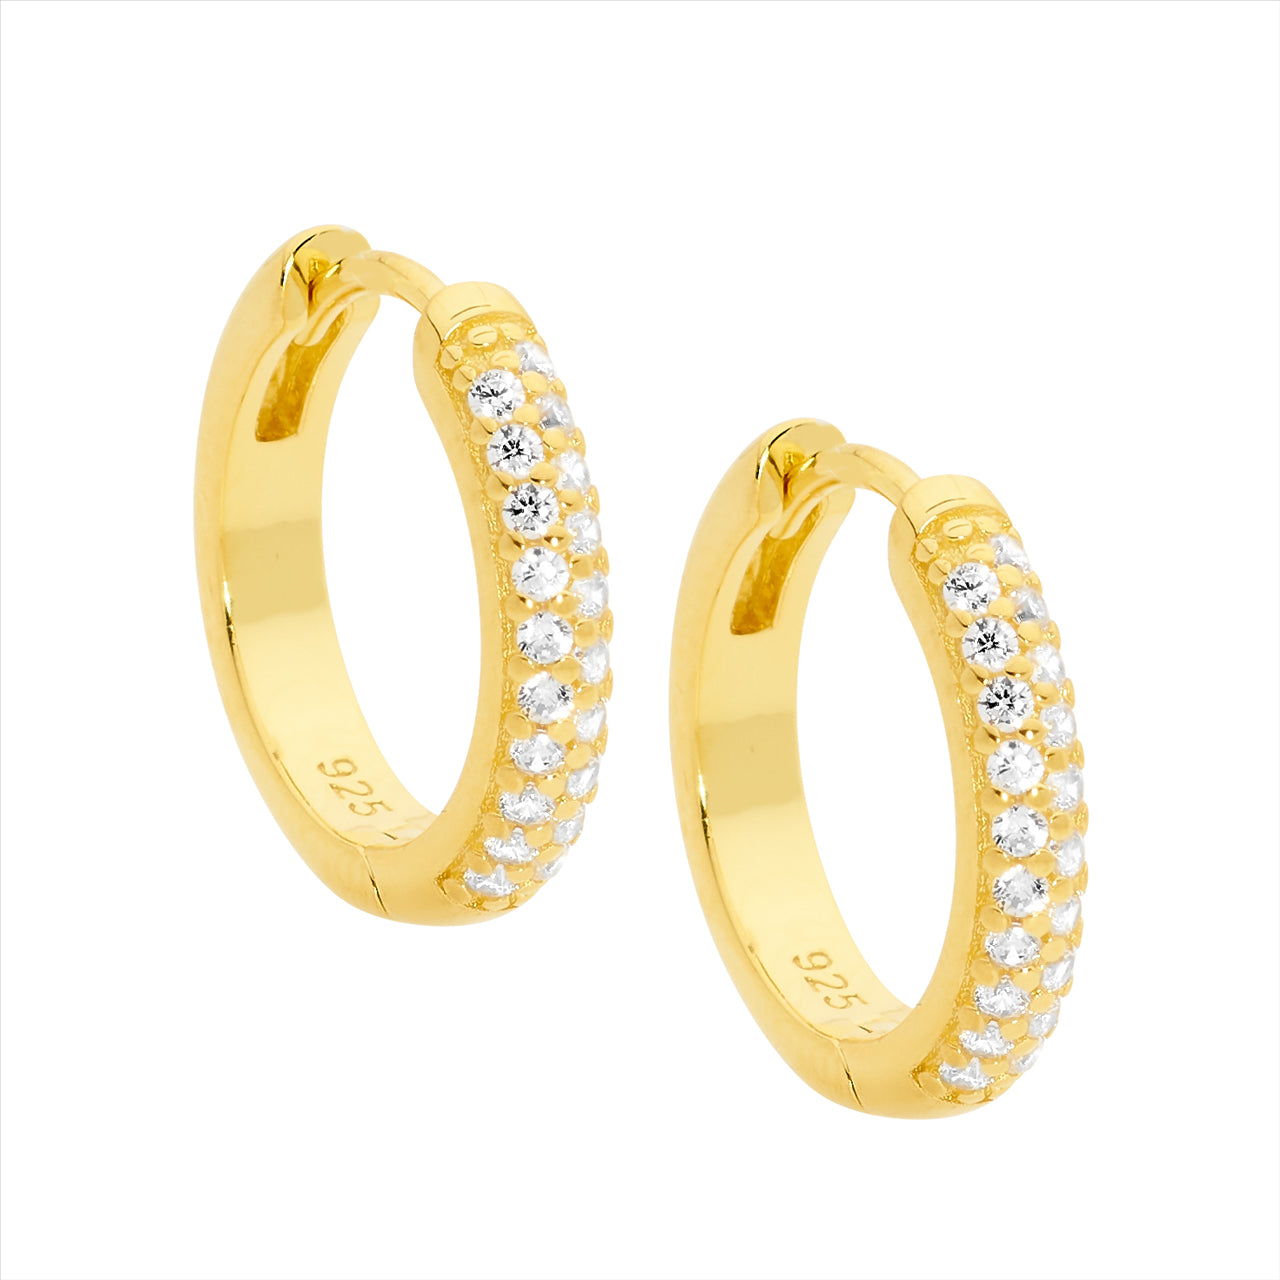 Sterling Silver/Gold Plated Hoop Earring with Cubic Zirconia's